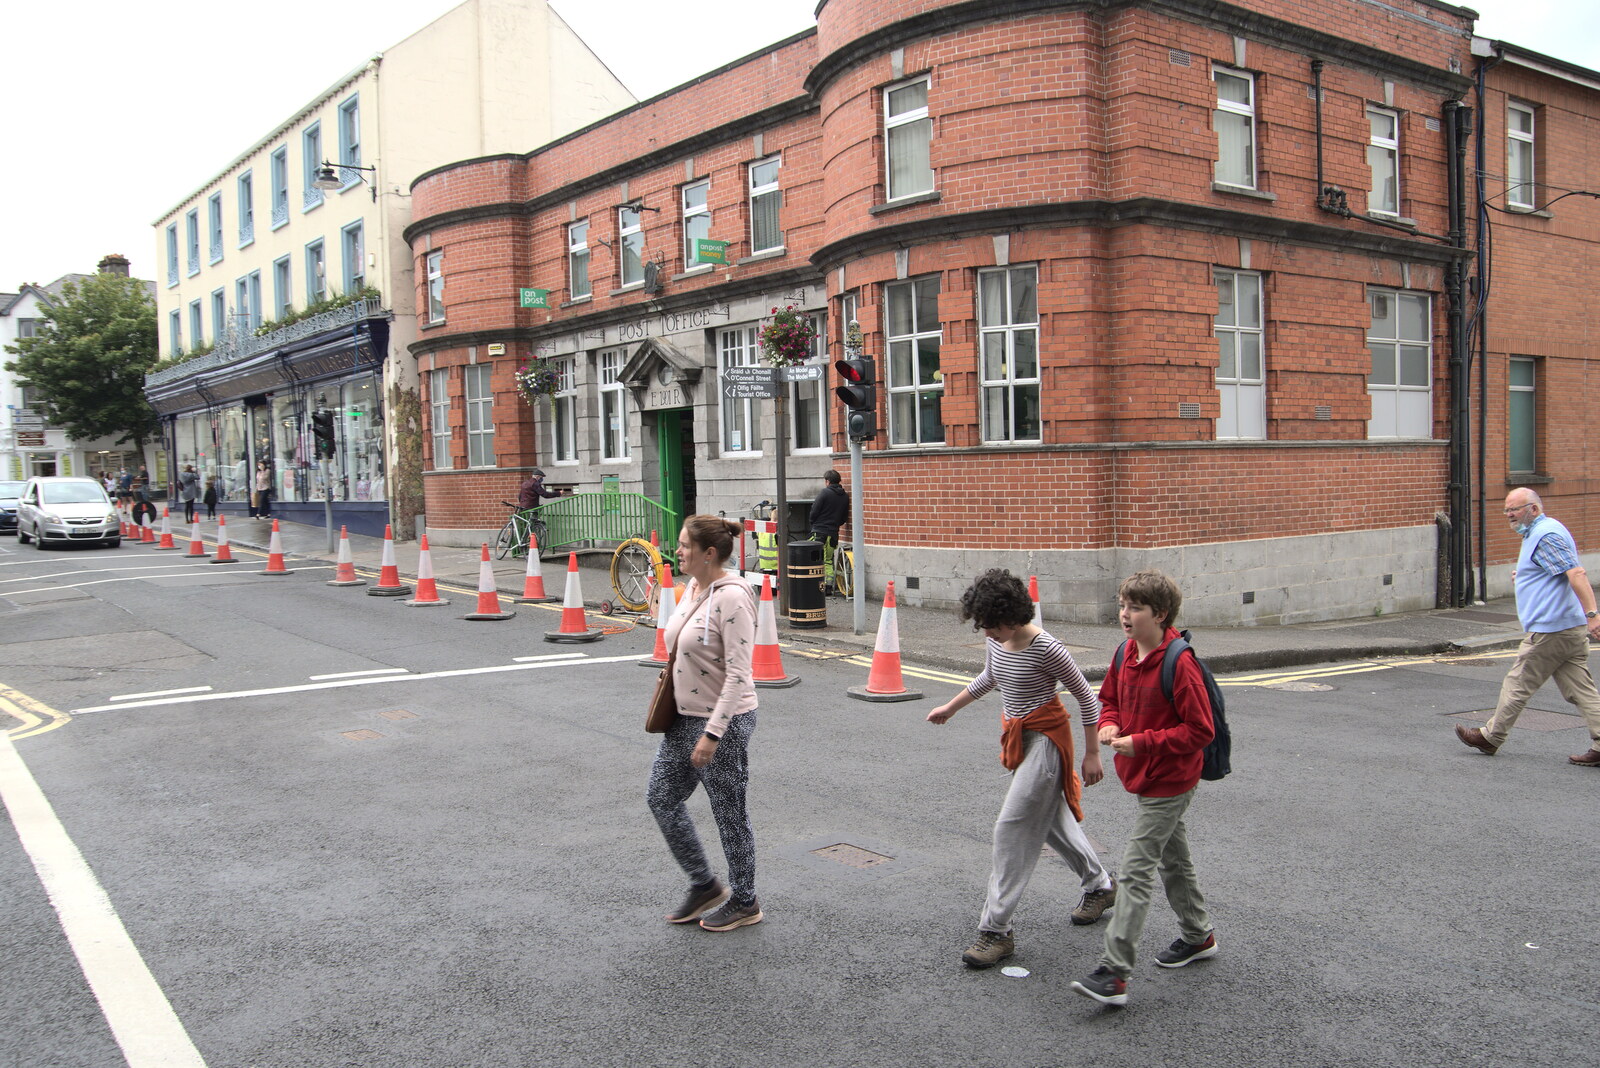 A Trip to Manorhamilton, County Leitrim, Ireland - 11th August 2021: Crossing the street by the old Post Office